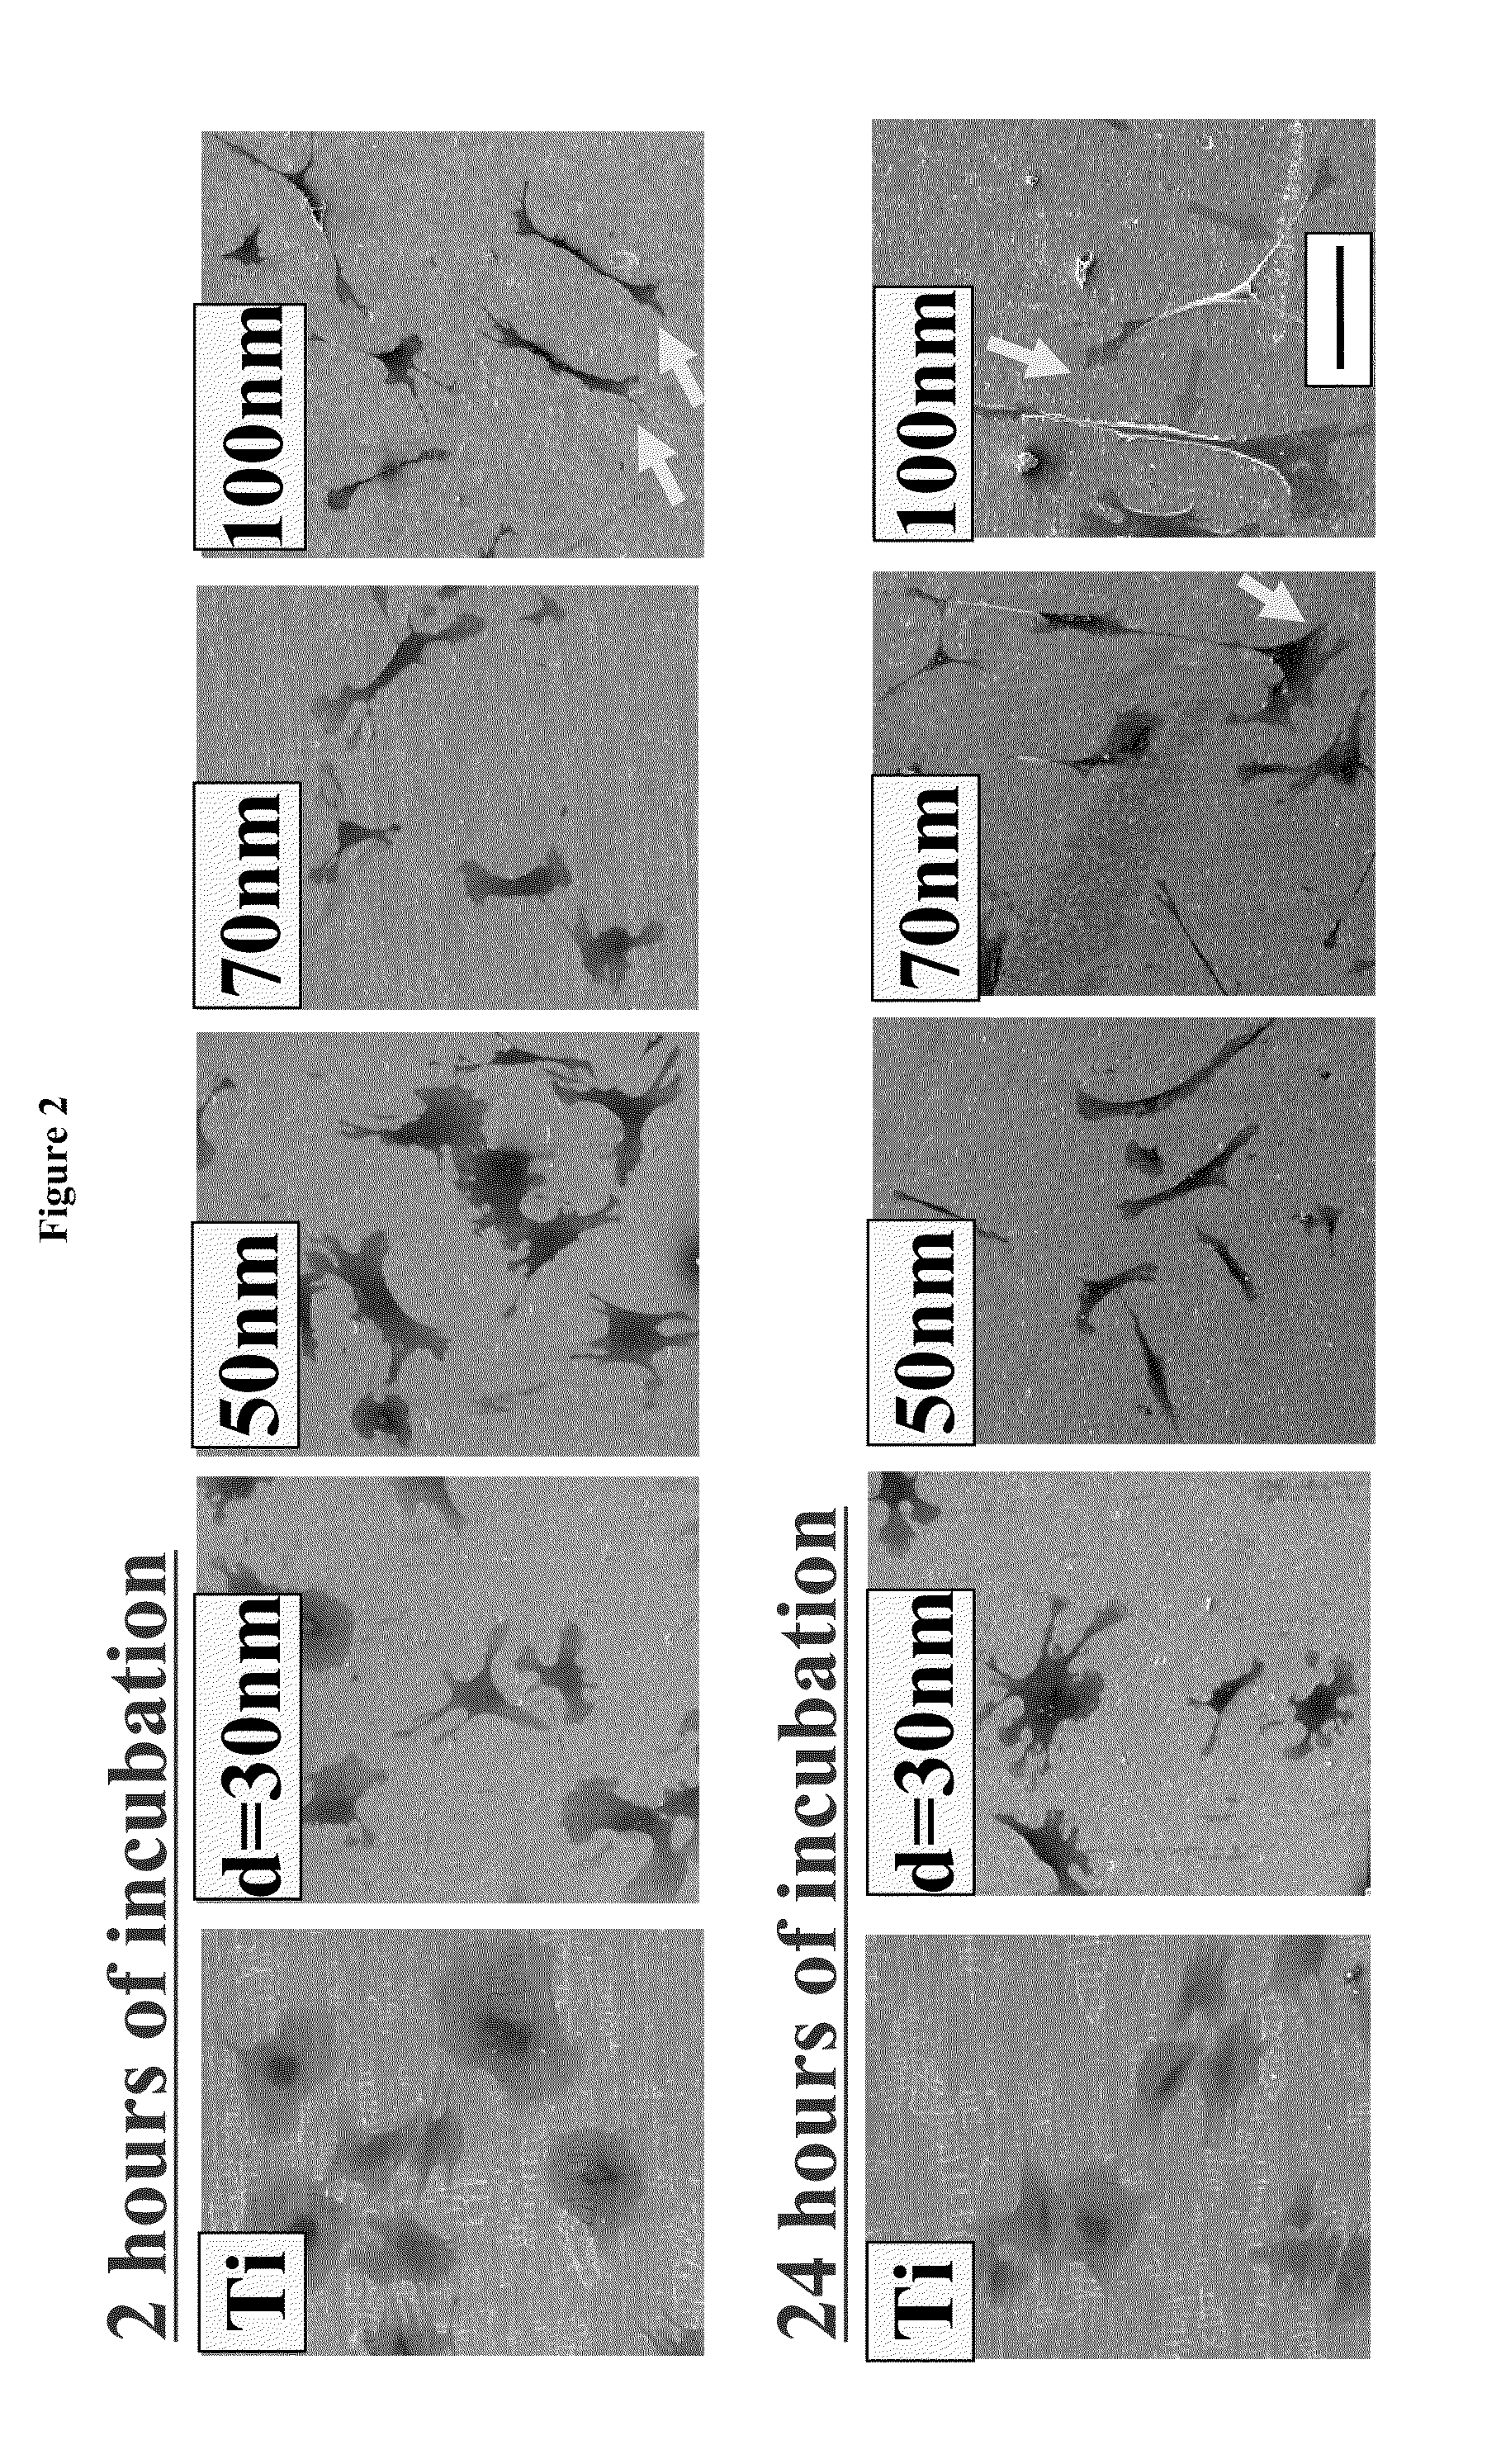 Articles comprising nano-materials for geometry-guided stem cell differentiation and enhanced bone growth